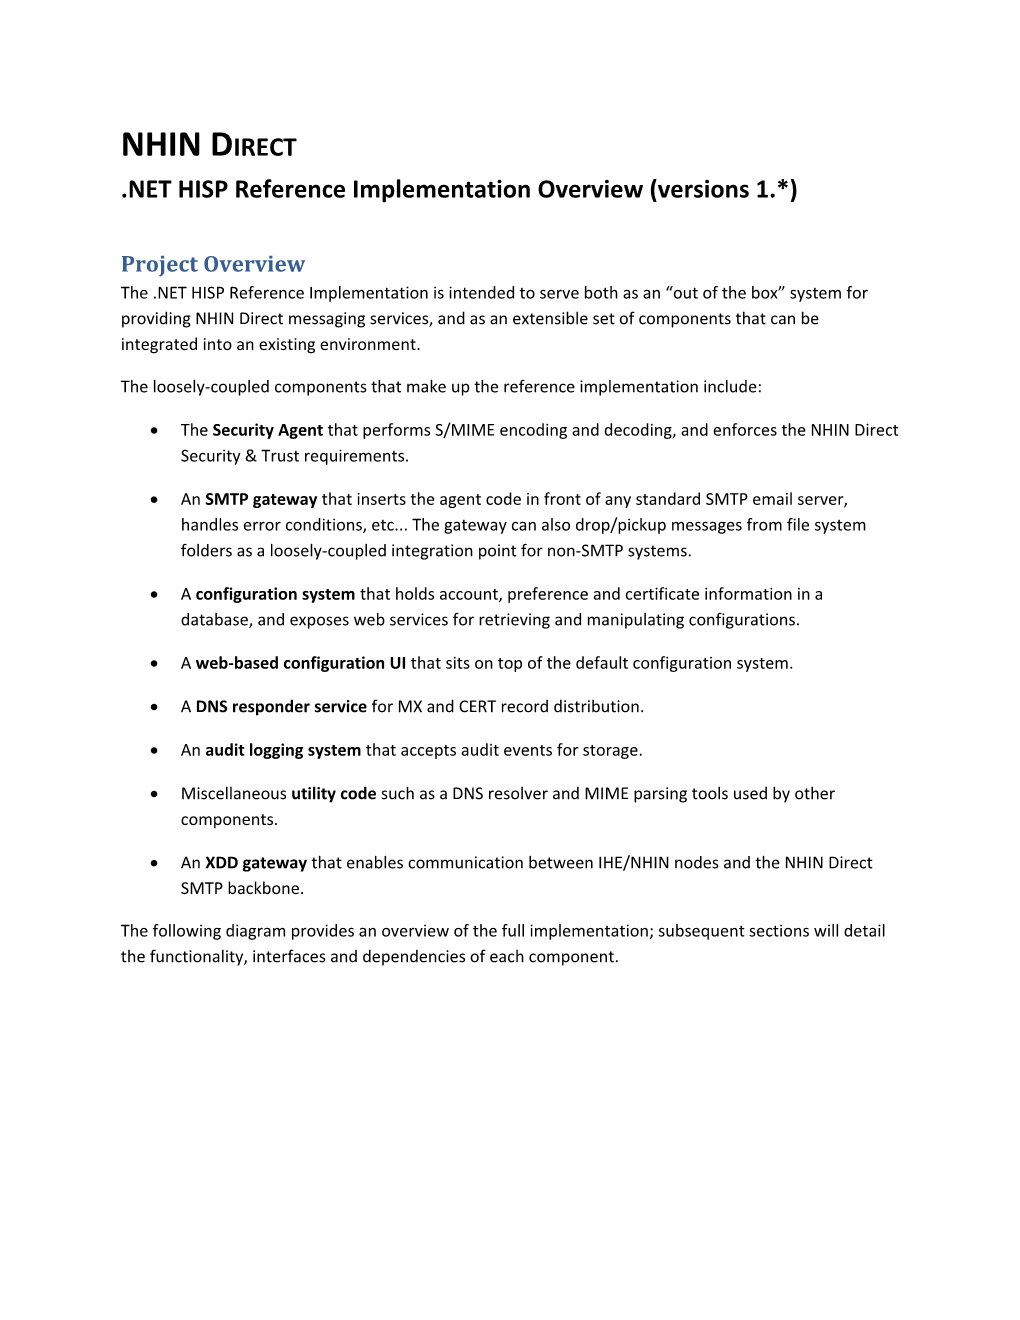 NET HISP Reference Implementation Overview (Versions 1.*)